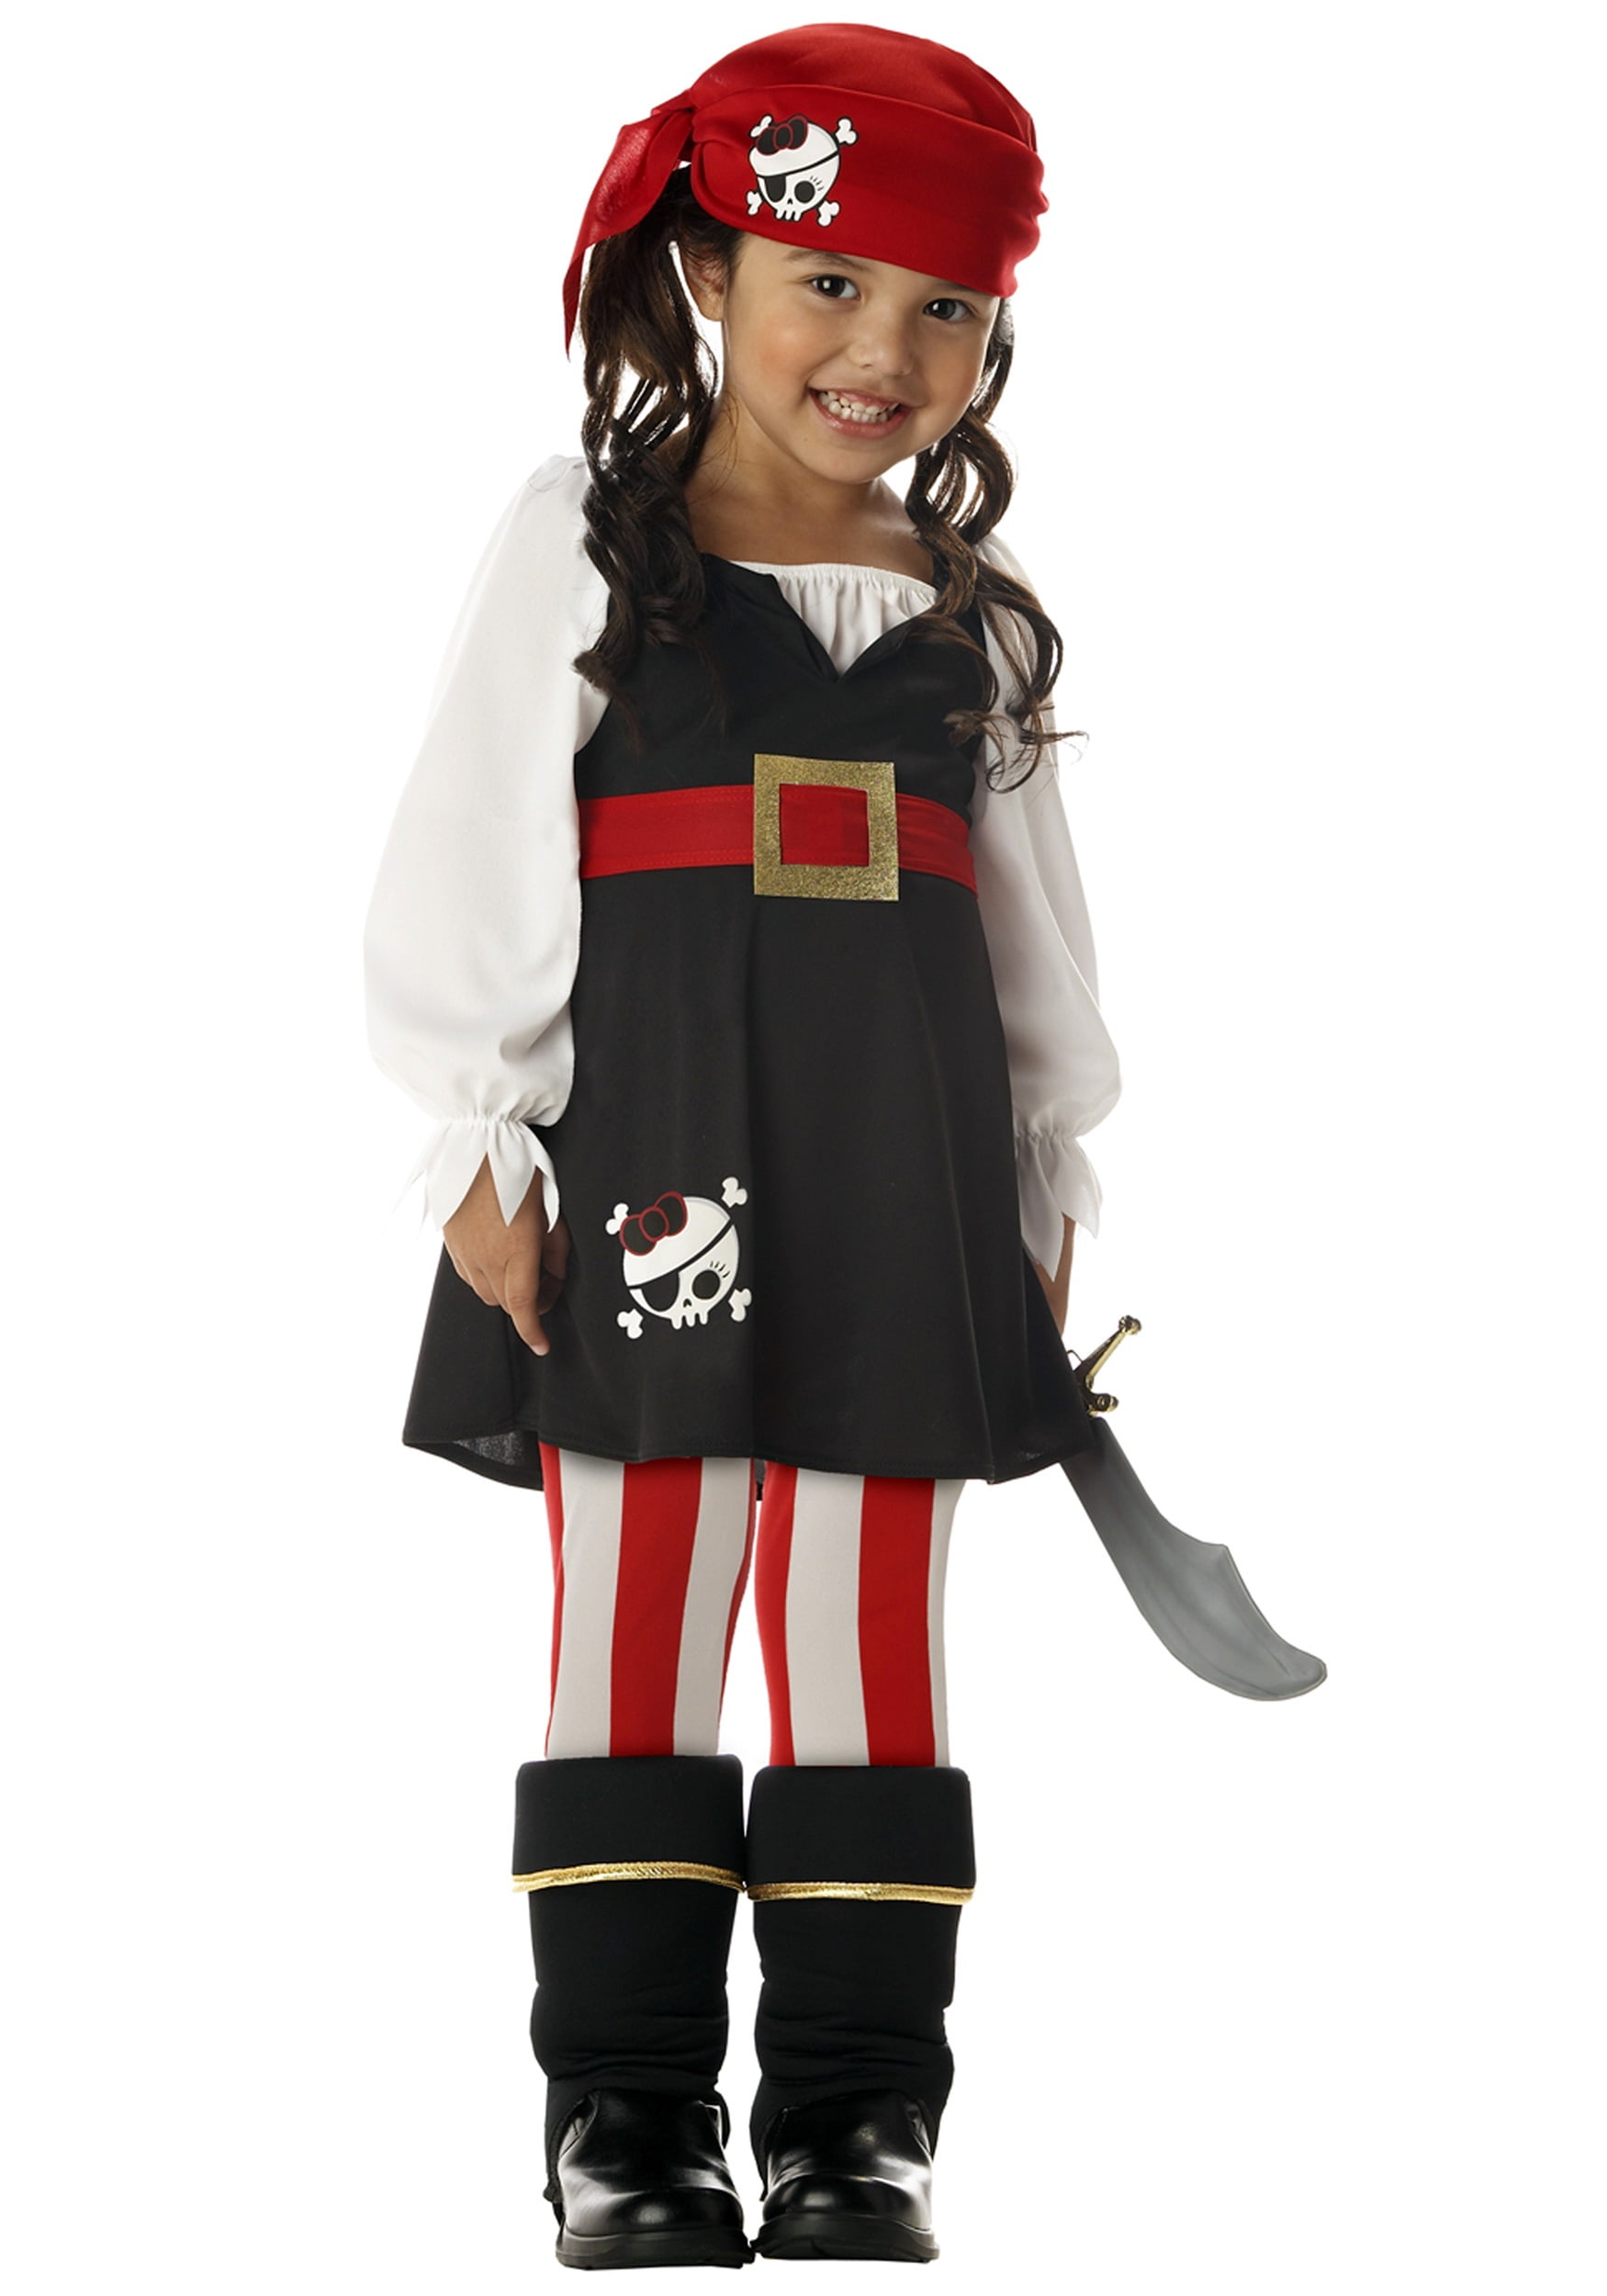 IzzY COSTUME~JaKe and the NeVeR LaNd PiRaTeS~Girls 2T~3T~4T~5T~NWT~Disney Store 